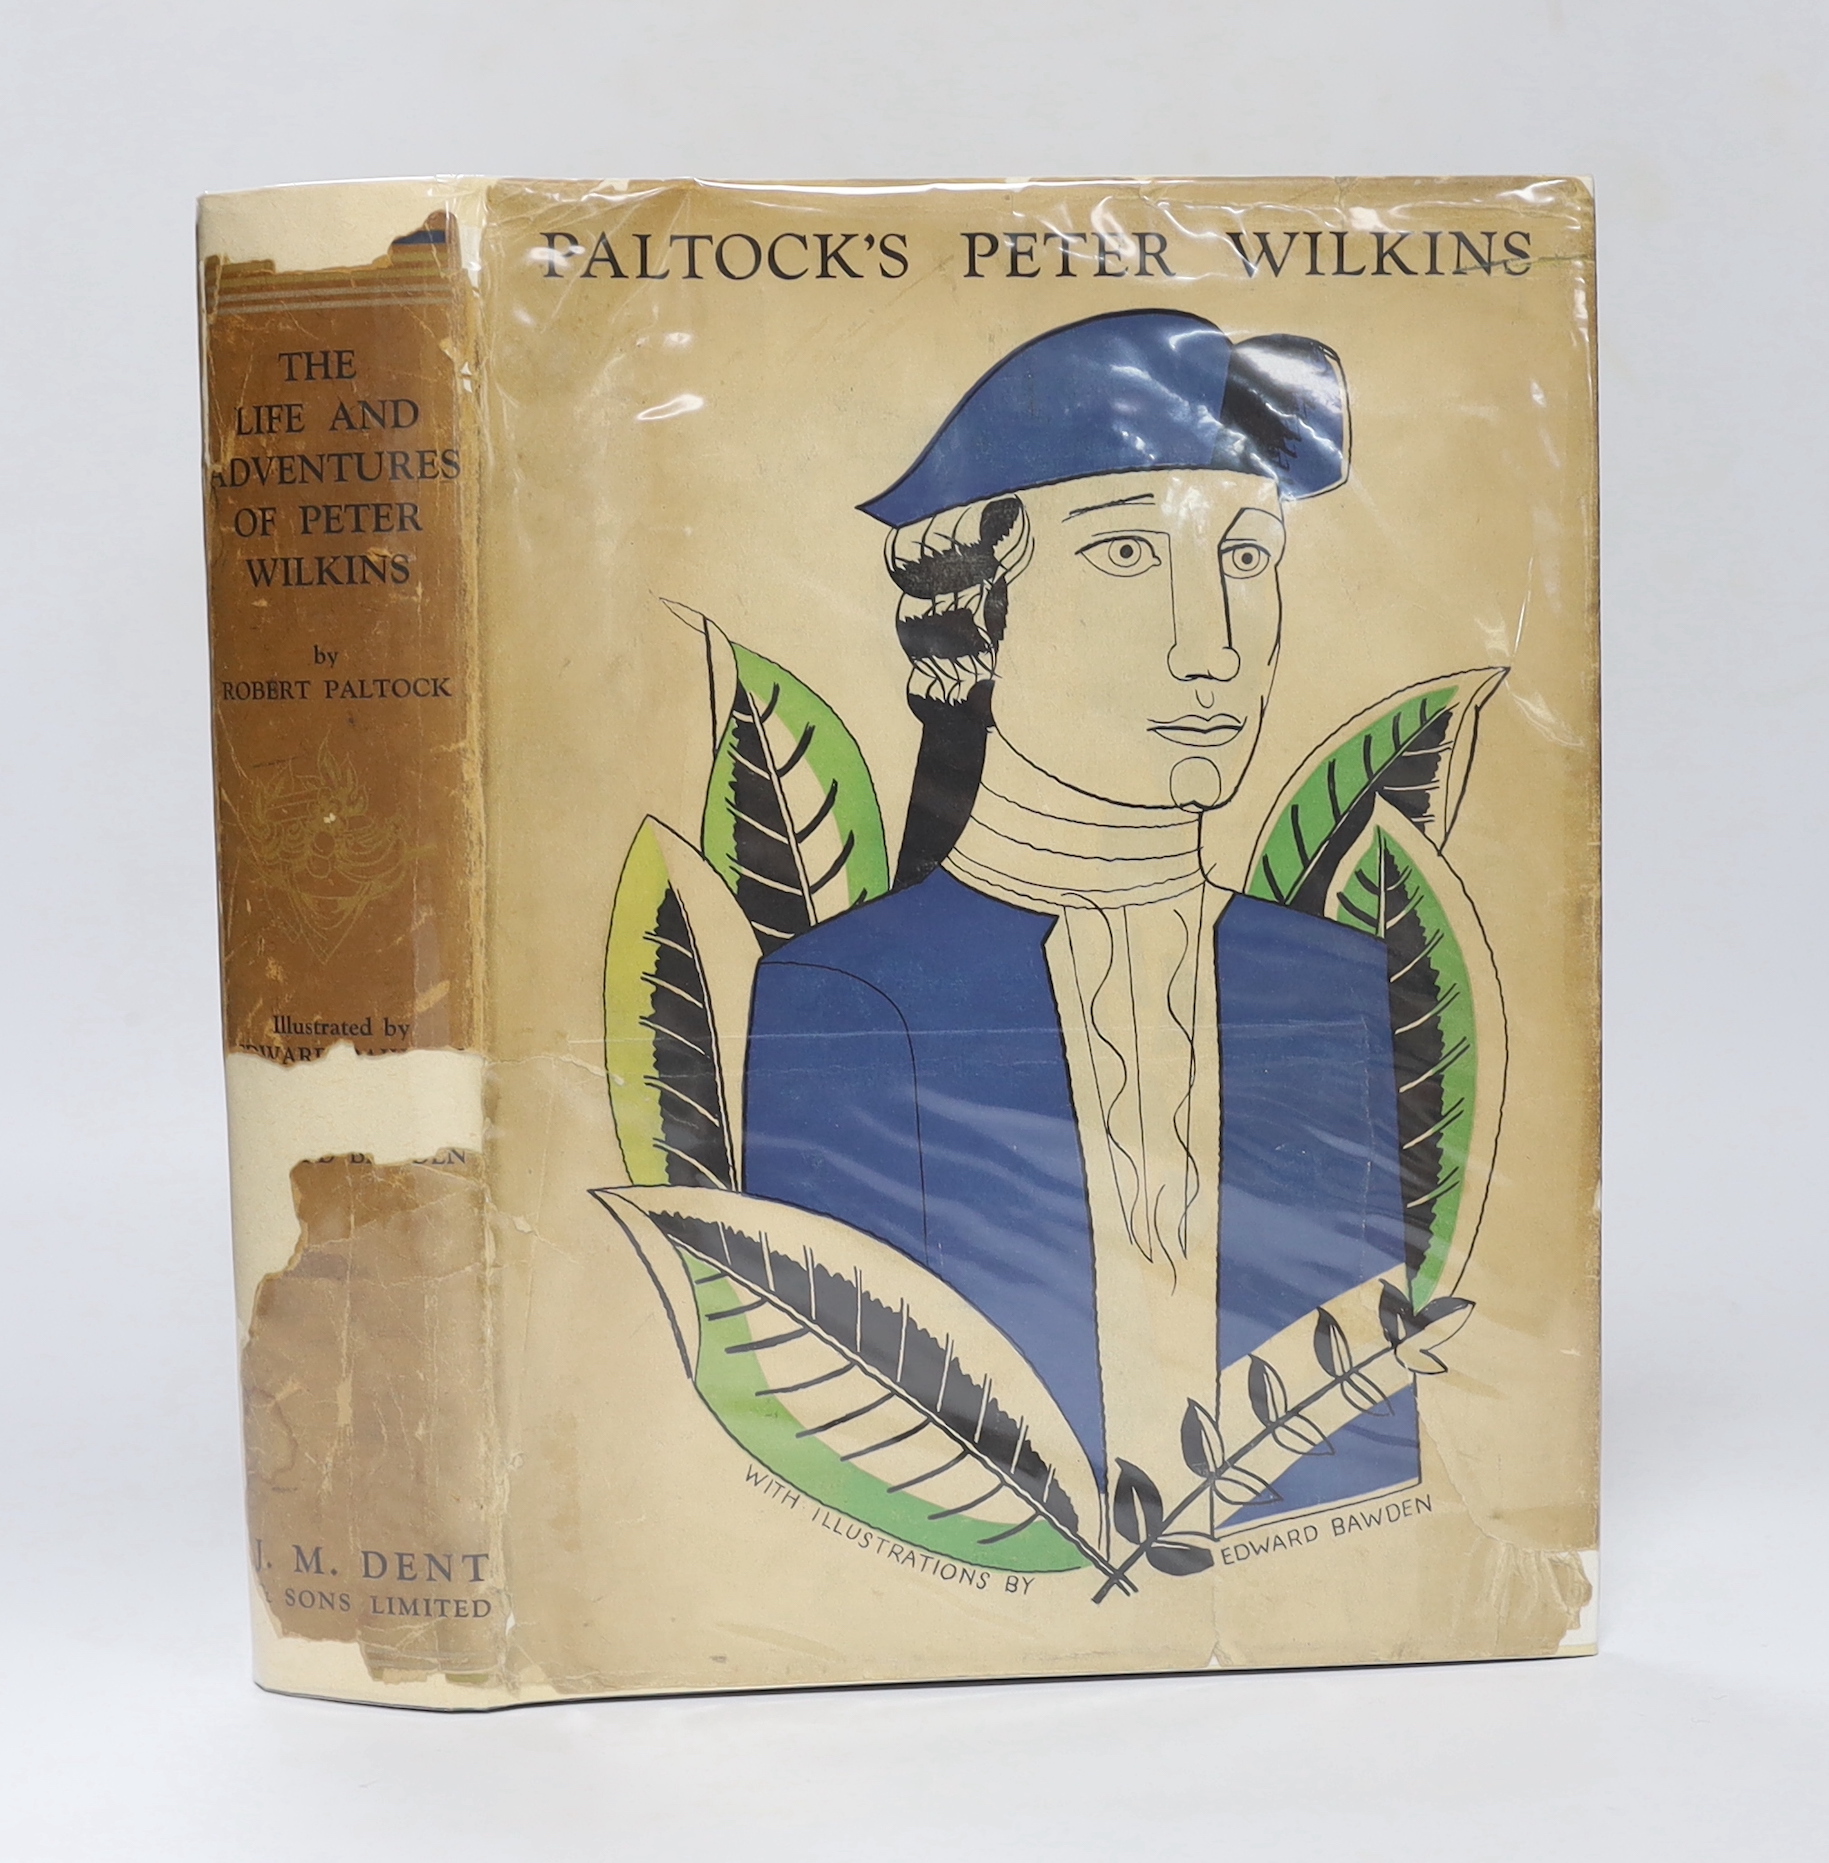 Bawden, Edward first book as illustrator - Paltock, Peter - The Life and Adventures of Peter Wilkins, 4to, blue cloth gilt in a torn d/j, with loss, with 19 coloured stencil illustrations, 5 being full page, 4 double-pag